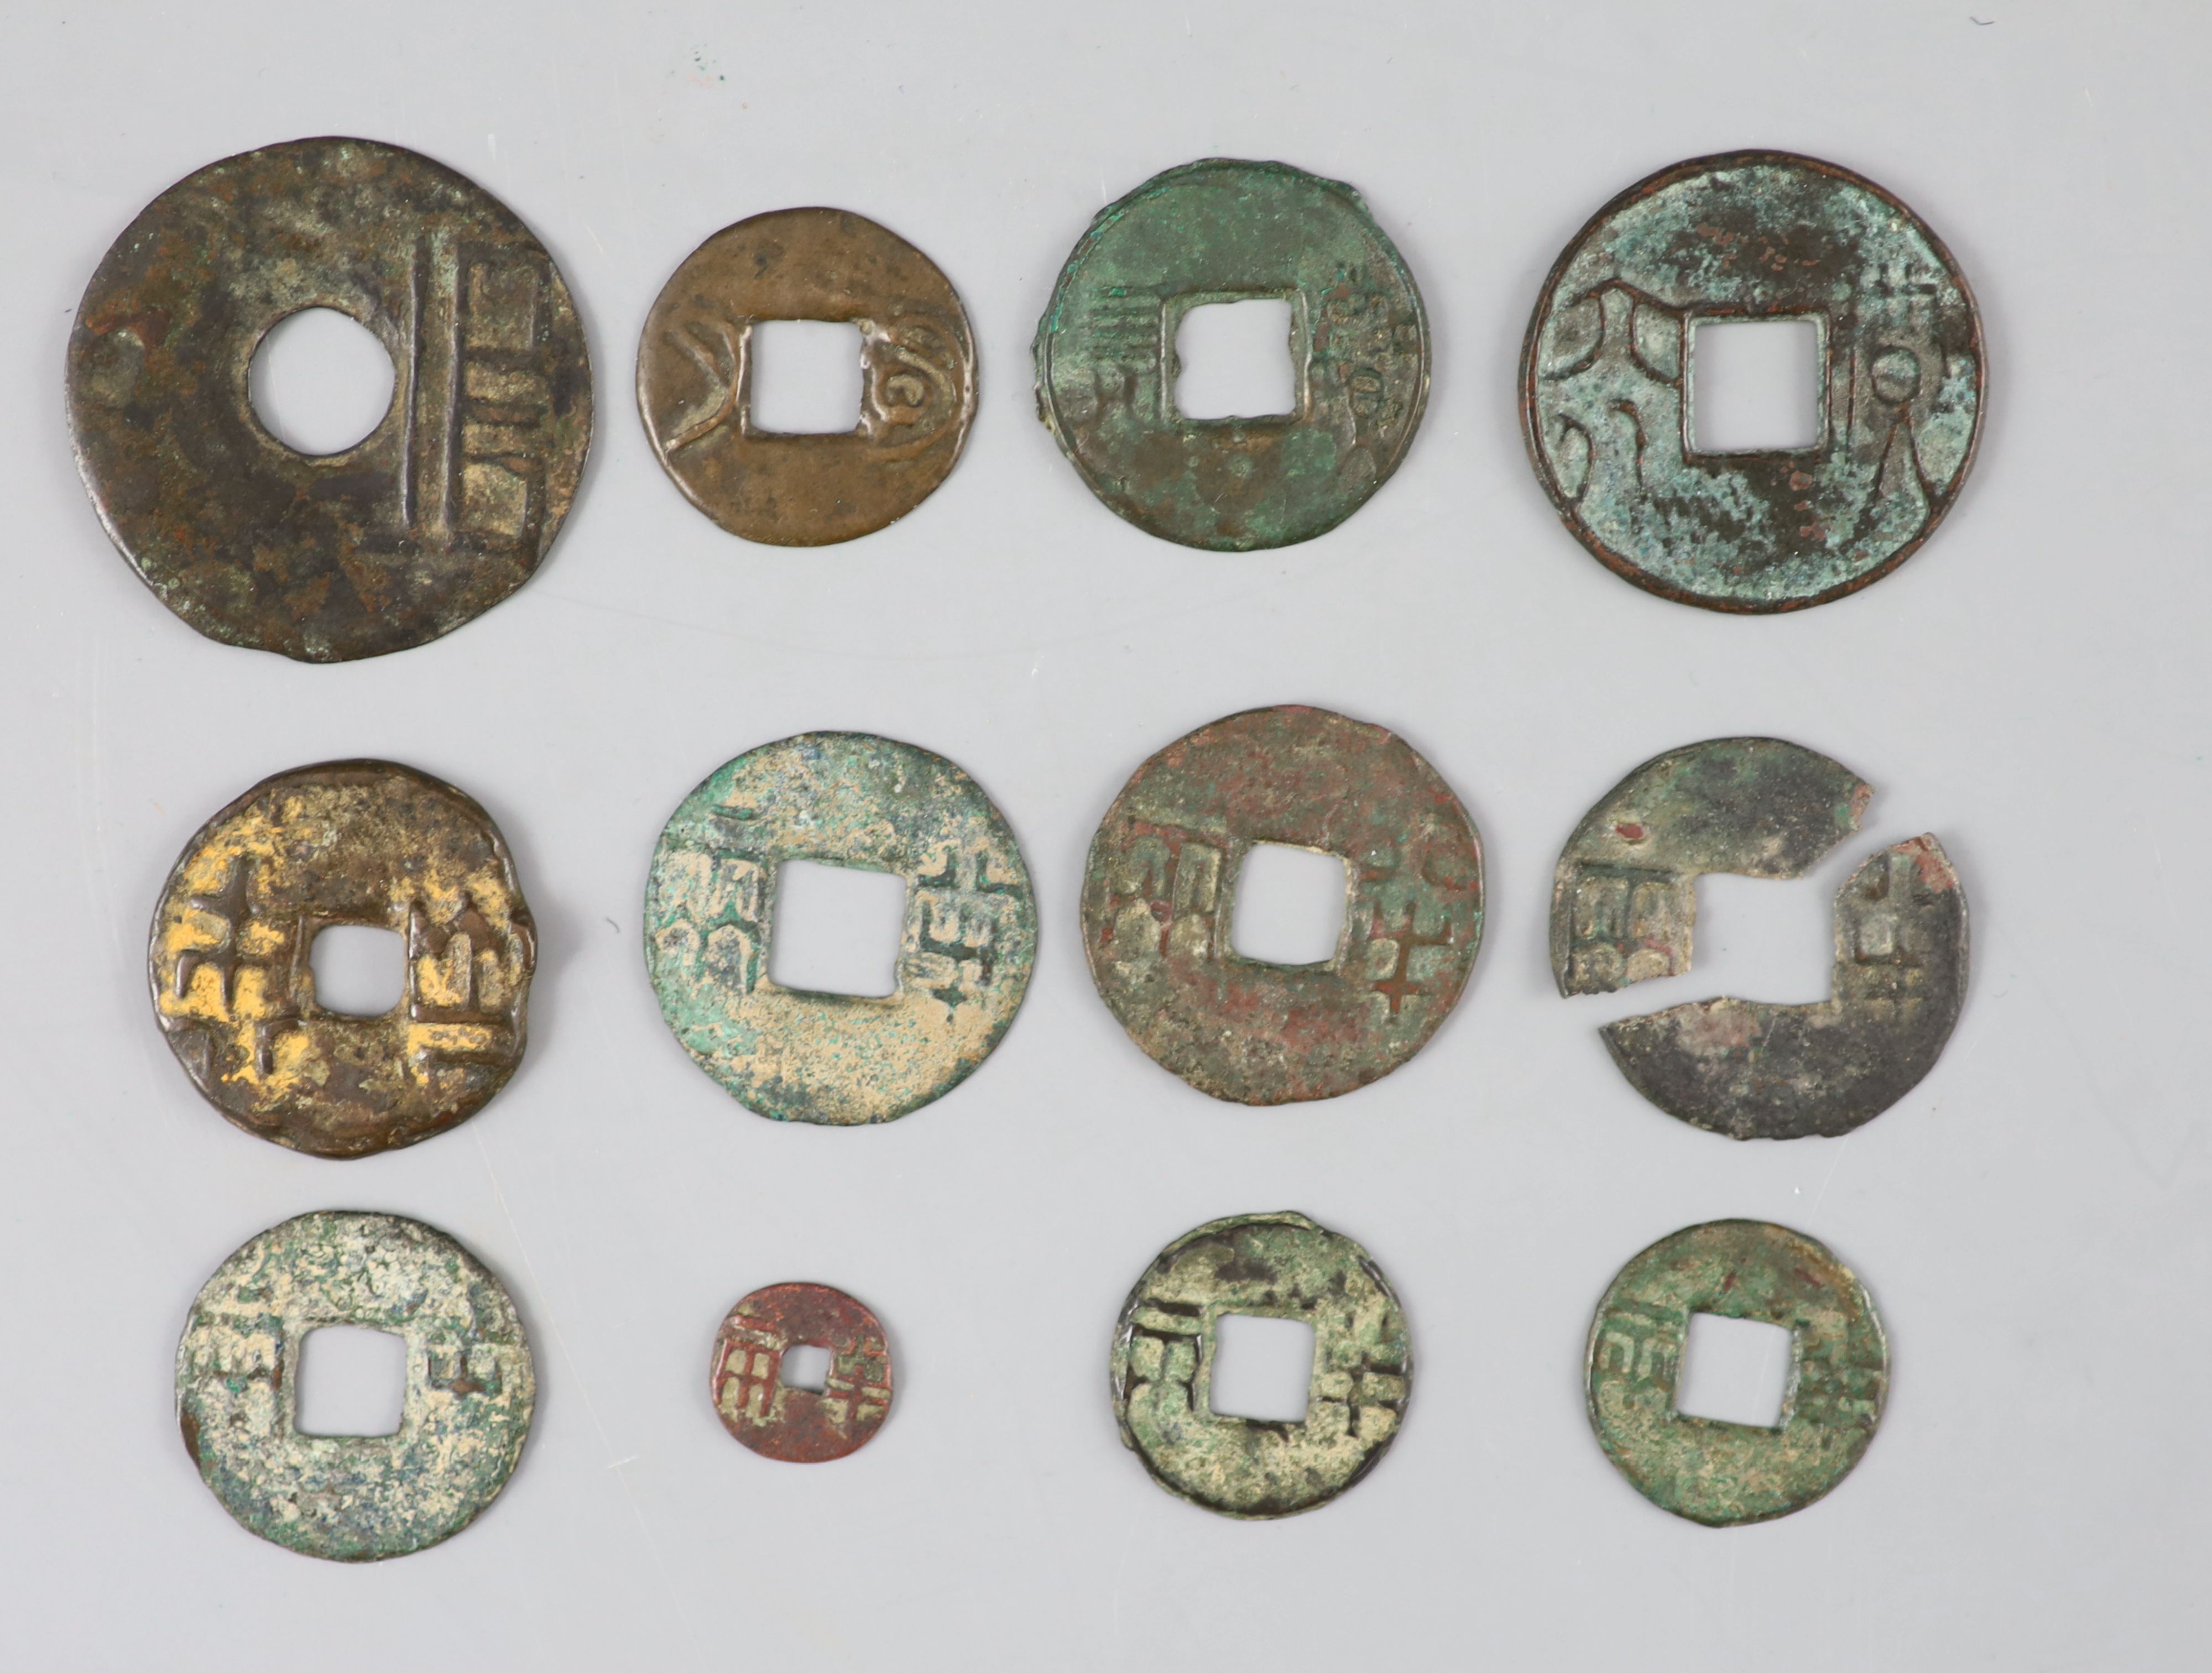 China, 12 Ancient bronze round coins, Zhou dynasty c.350 BC to Western Han dynasty c.119 BC,